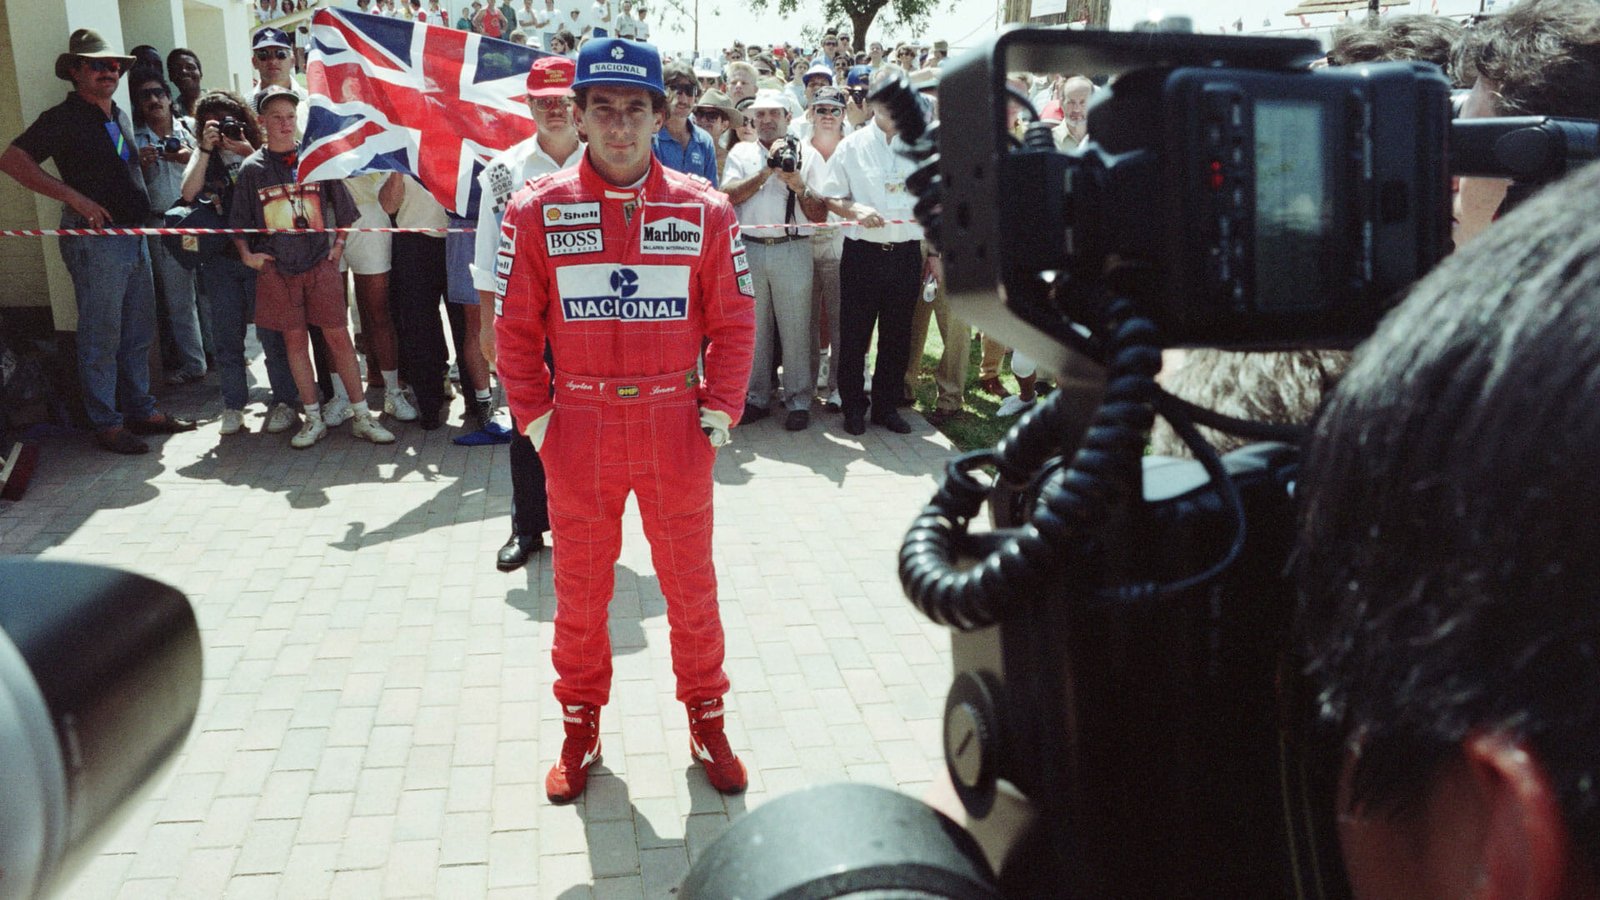 best documentaries of all time : Senna